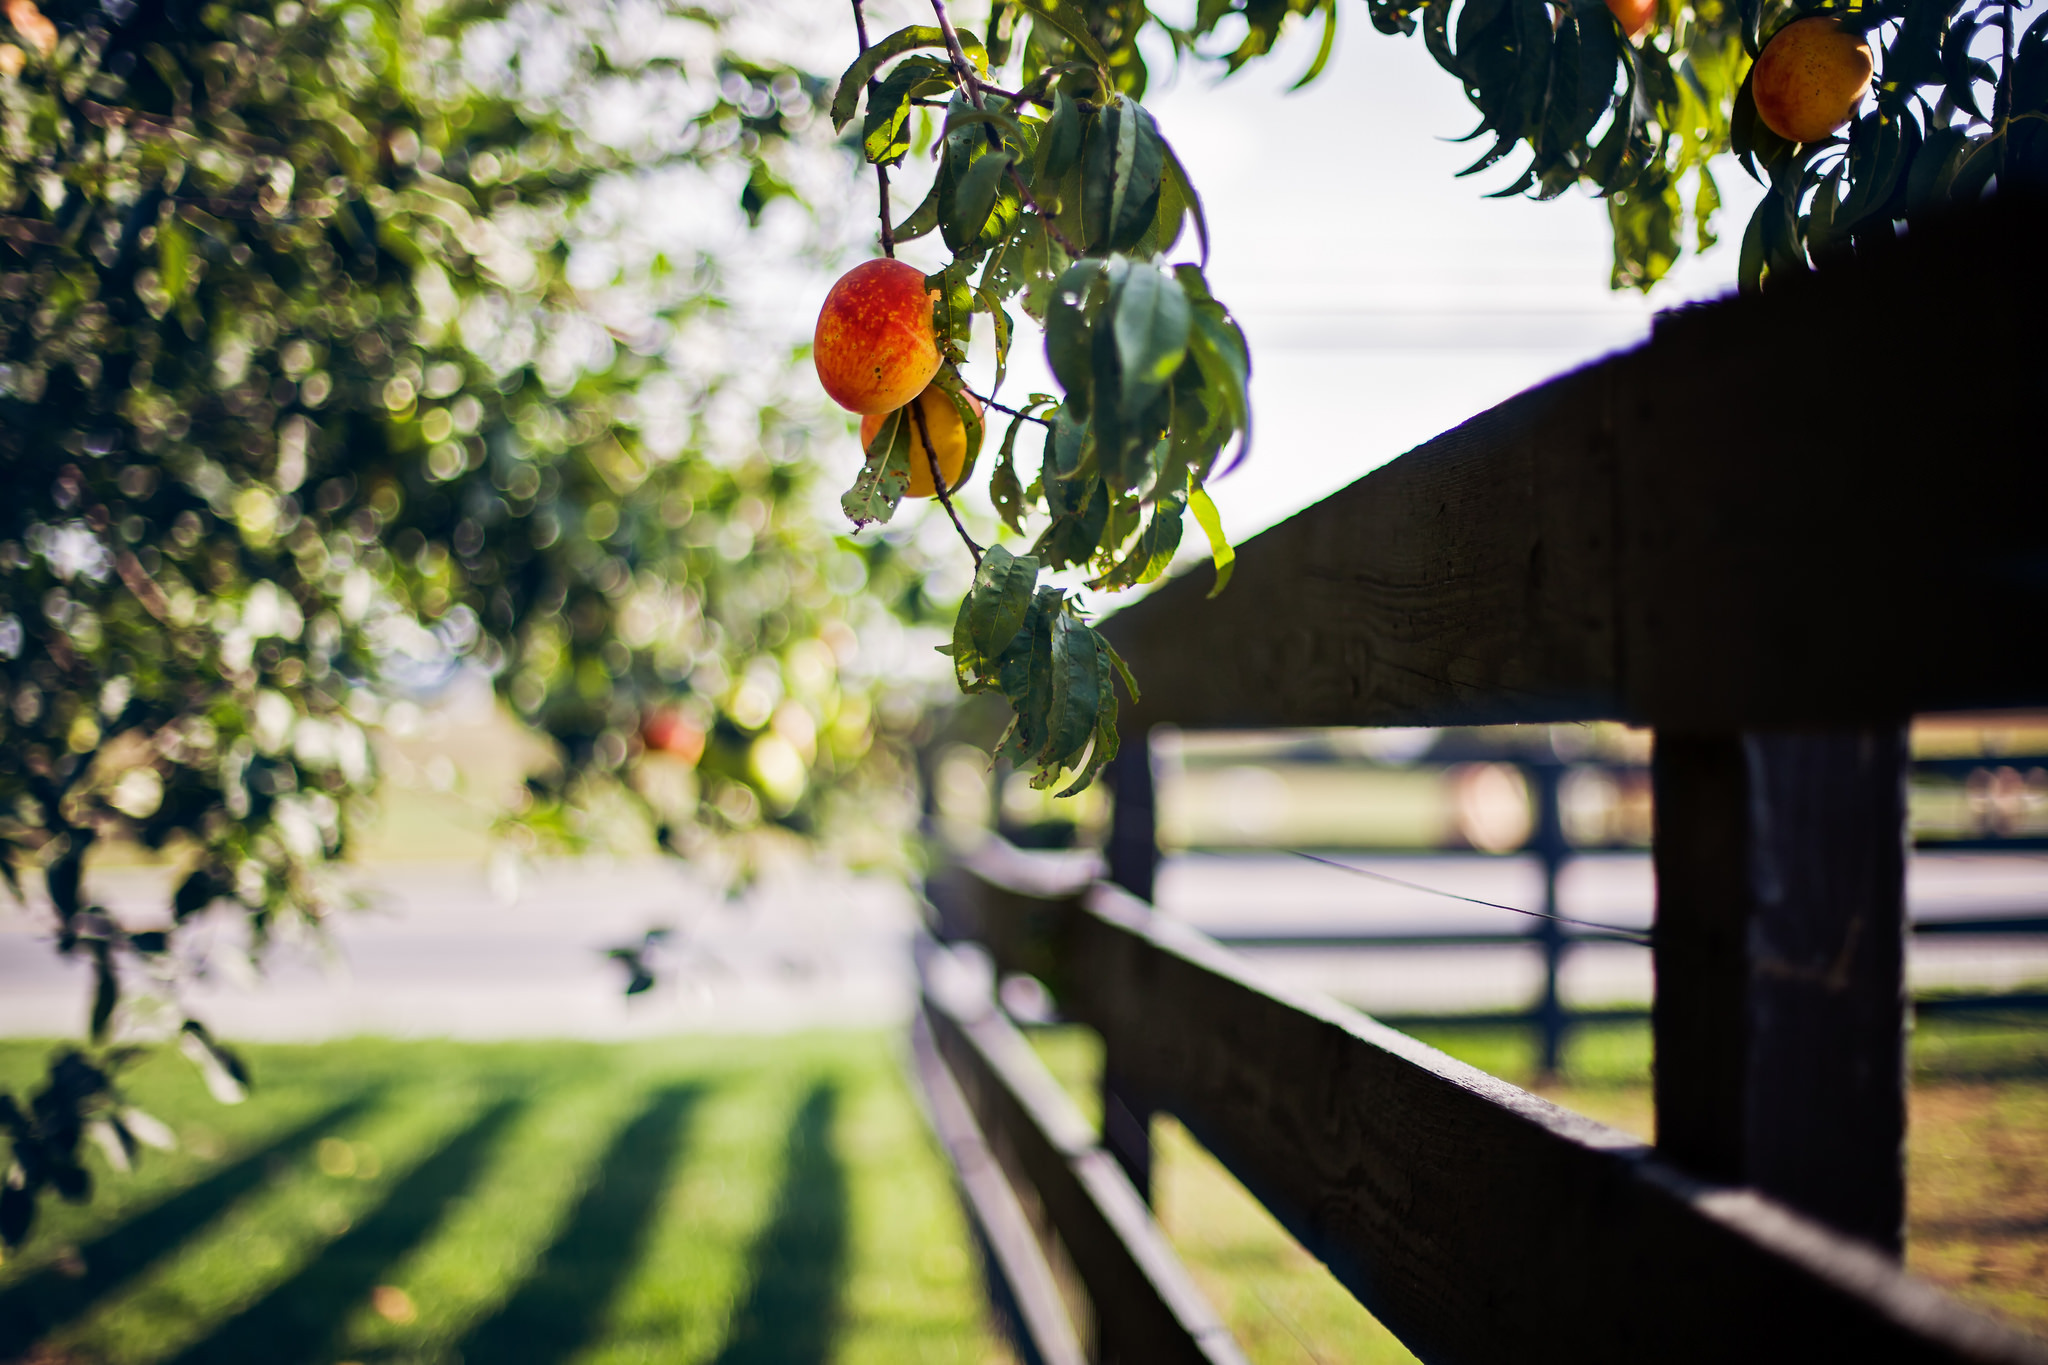 General 2048x1365 fruit trees fence plants